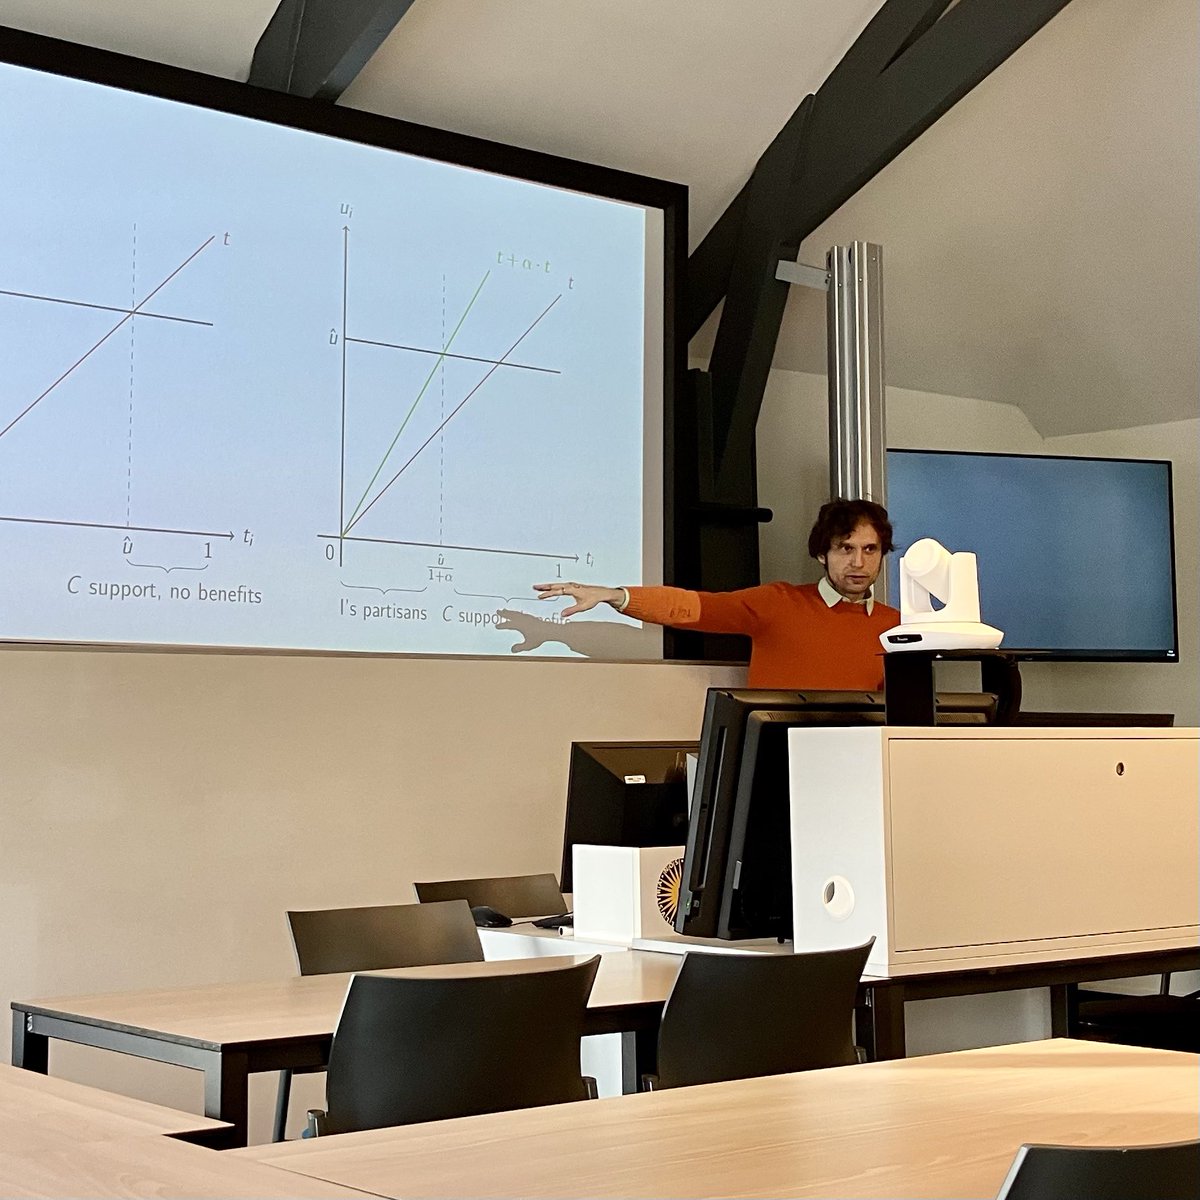 Had the pleasure of discussing a great paper by Samsonov and @senkovmx at the @DemoTrans workshop today in Utrecht🇳🇱 Their novel model suggests that allowing the use of microtargeting in political campaigns may have positive effects on welfare👍💰